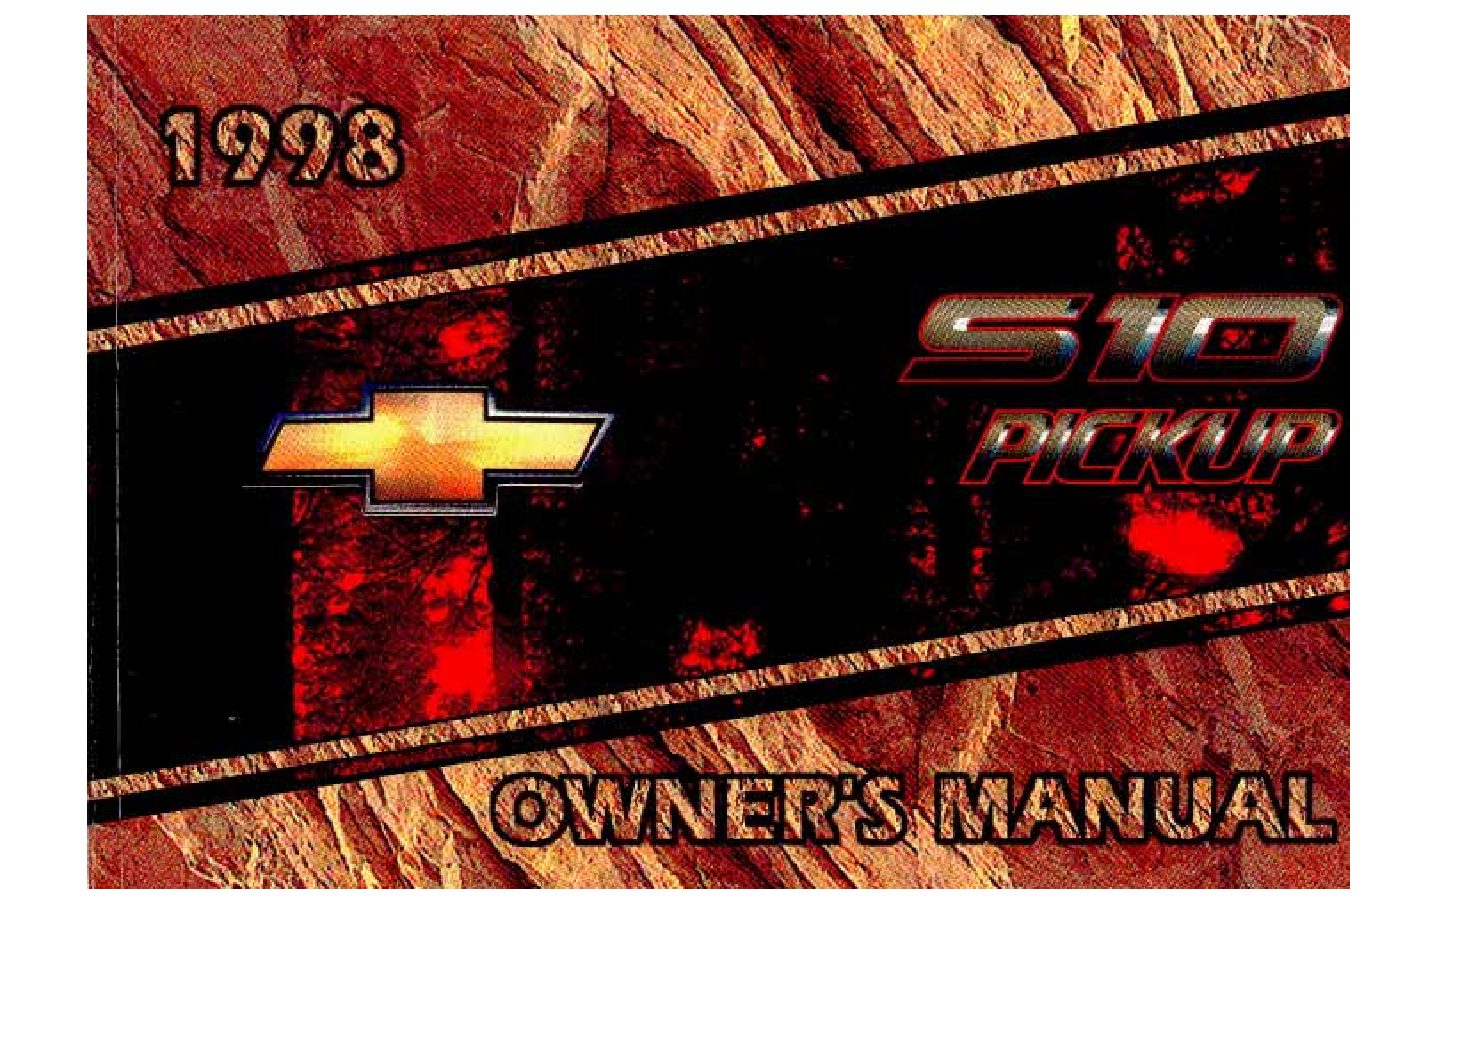 1998 Chevrolet S10 Owner’s Manual Image